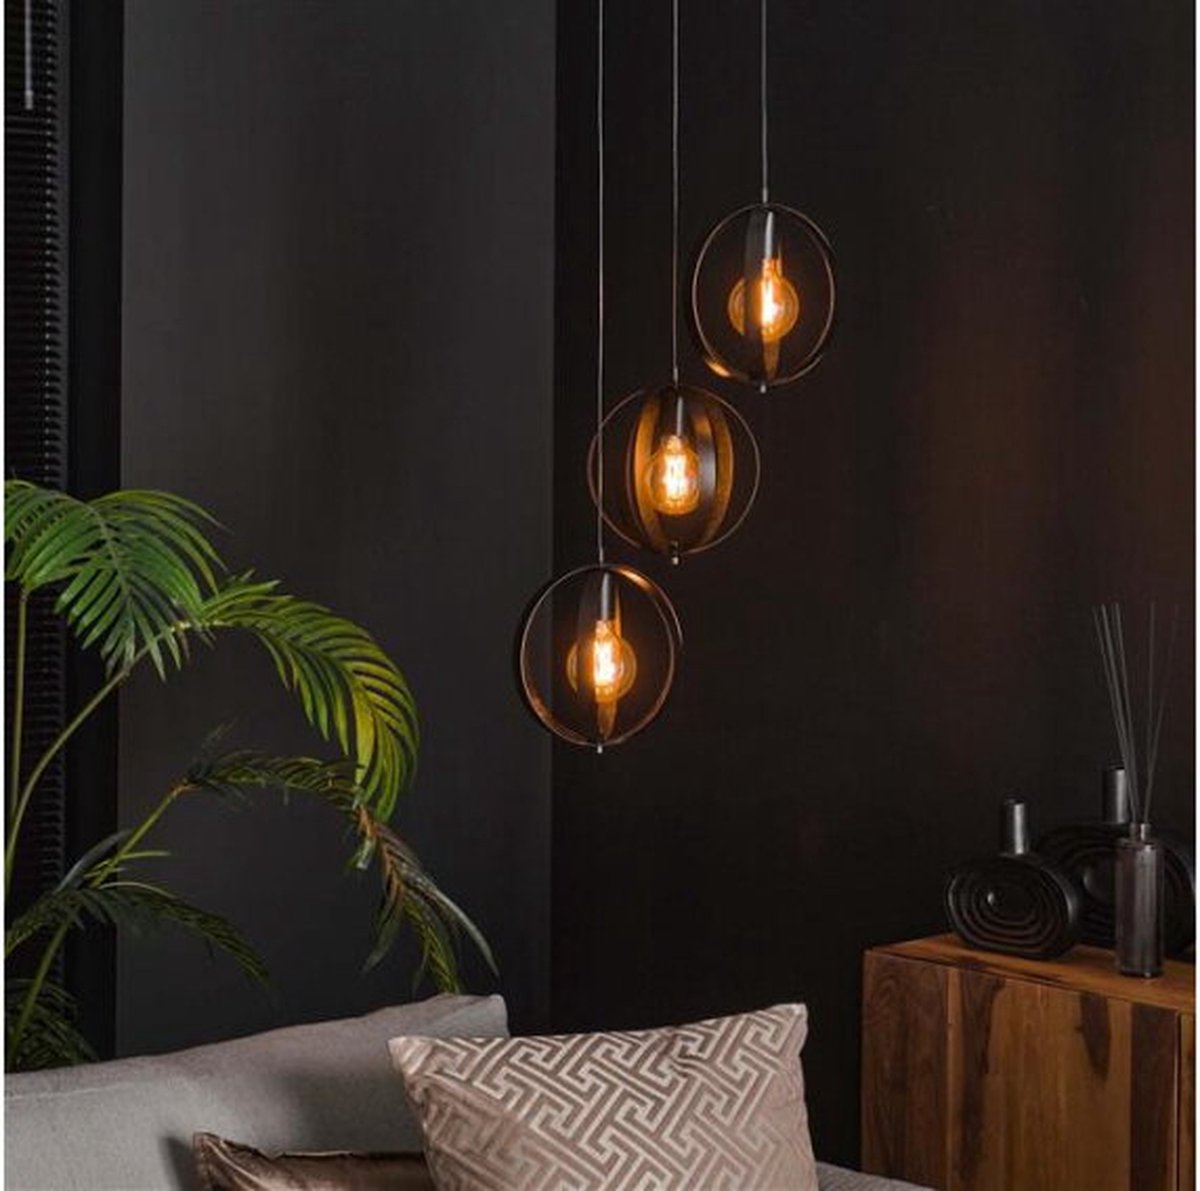 Hanglamp Halo getrapt 3 Lampen - Charcoal